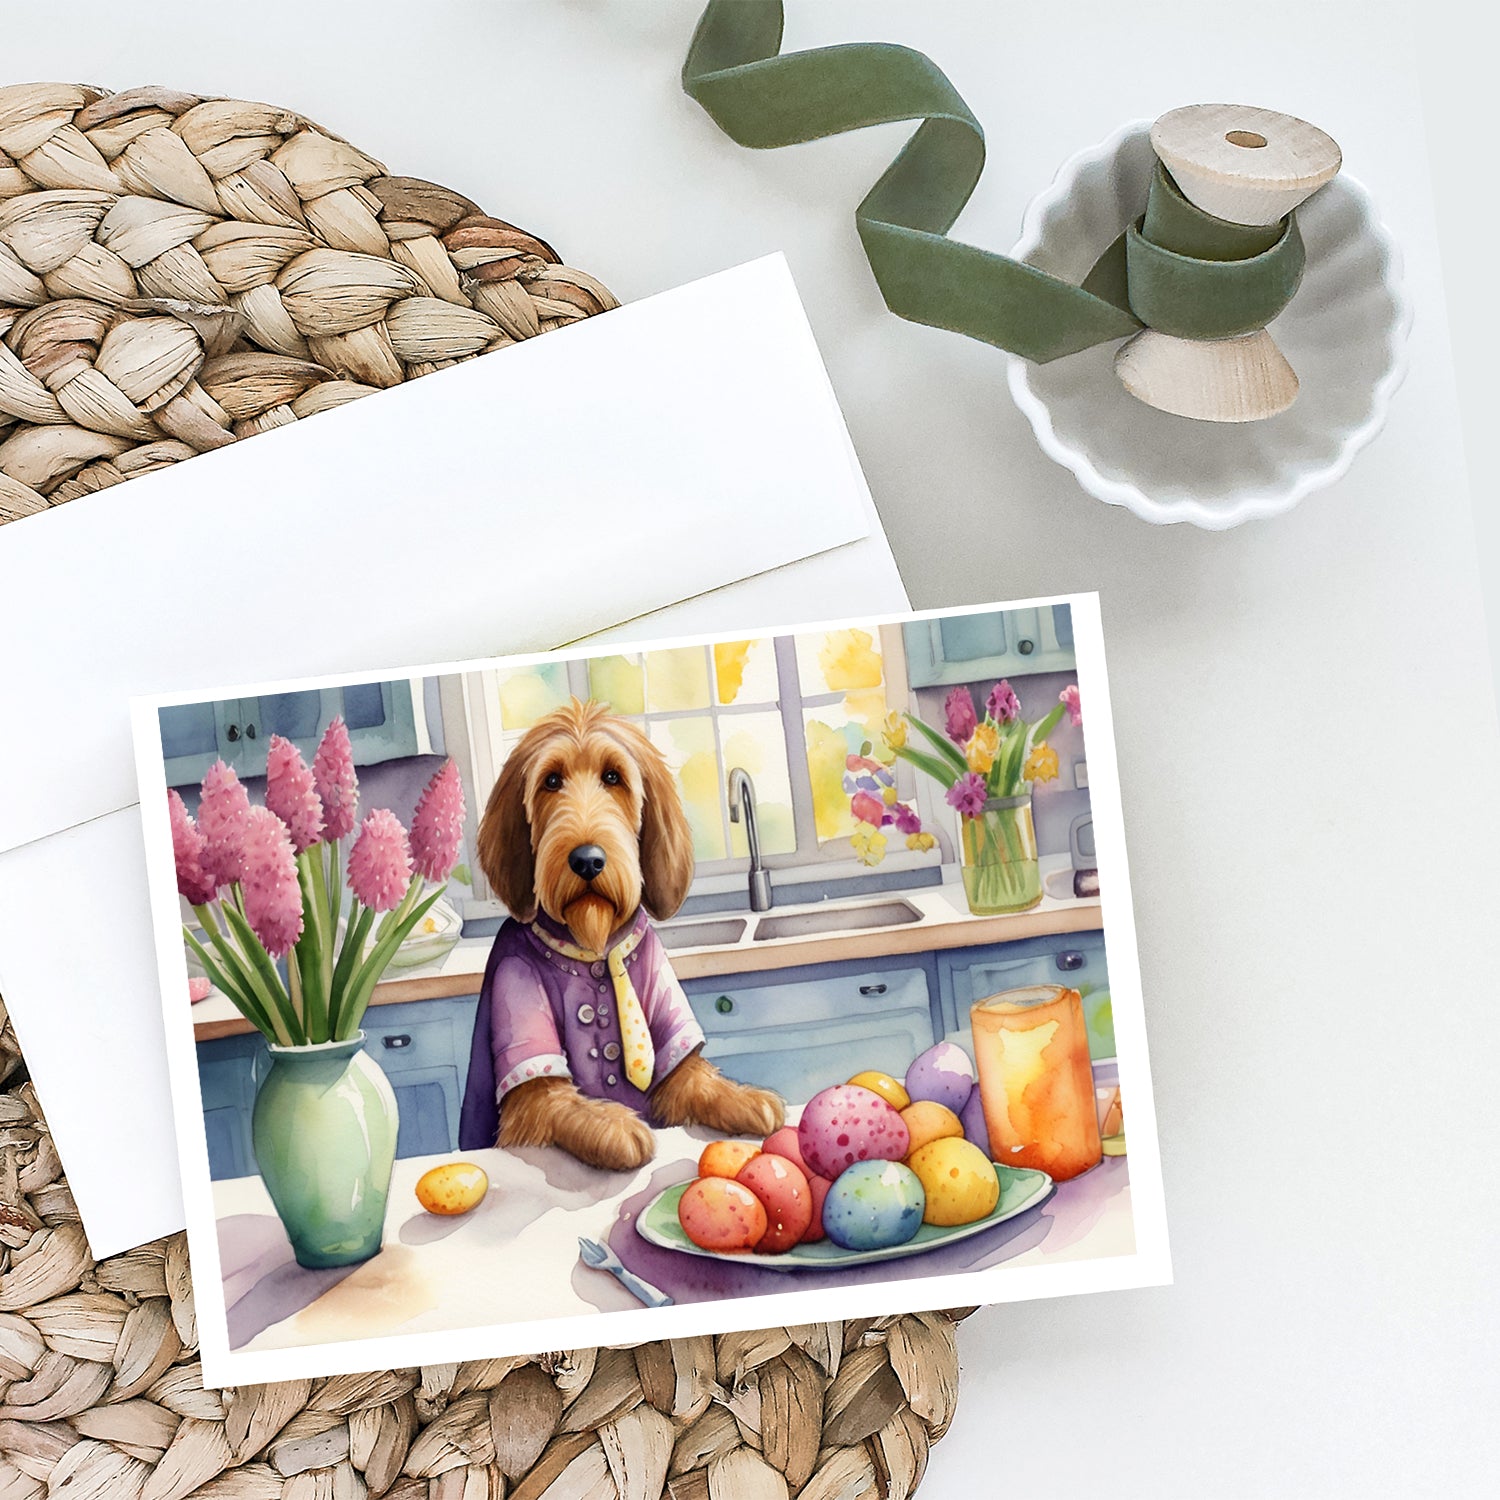 Buy this Decorating Easter Otterhound Greeting Cards Pack of 8